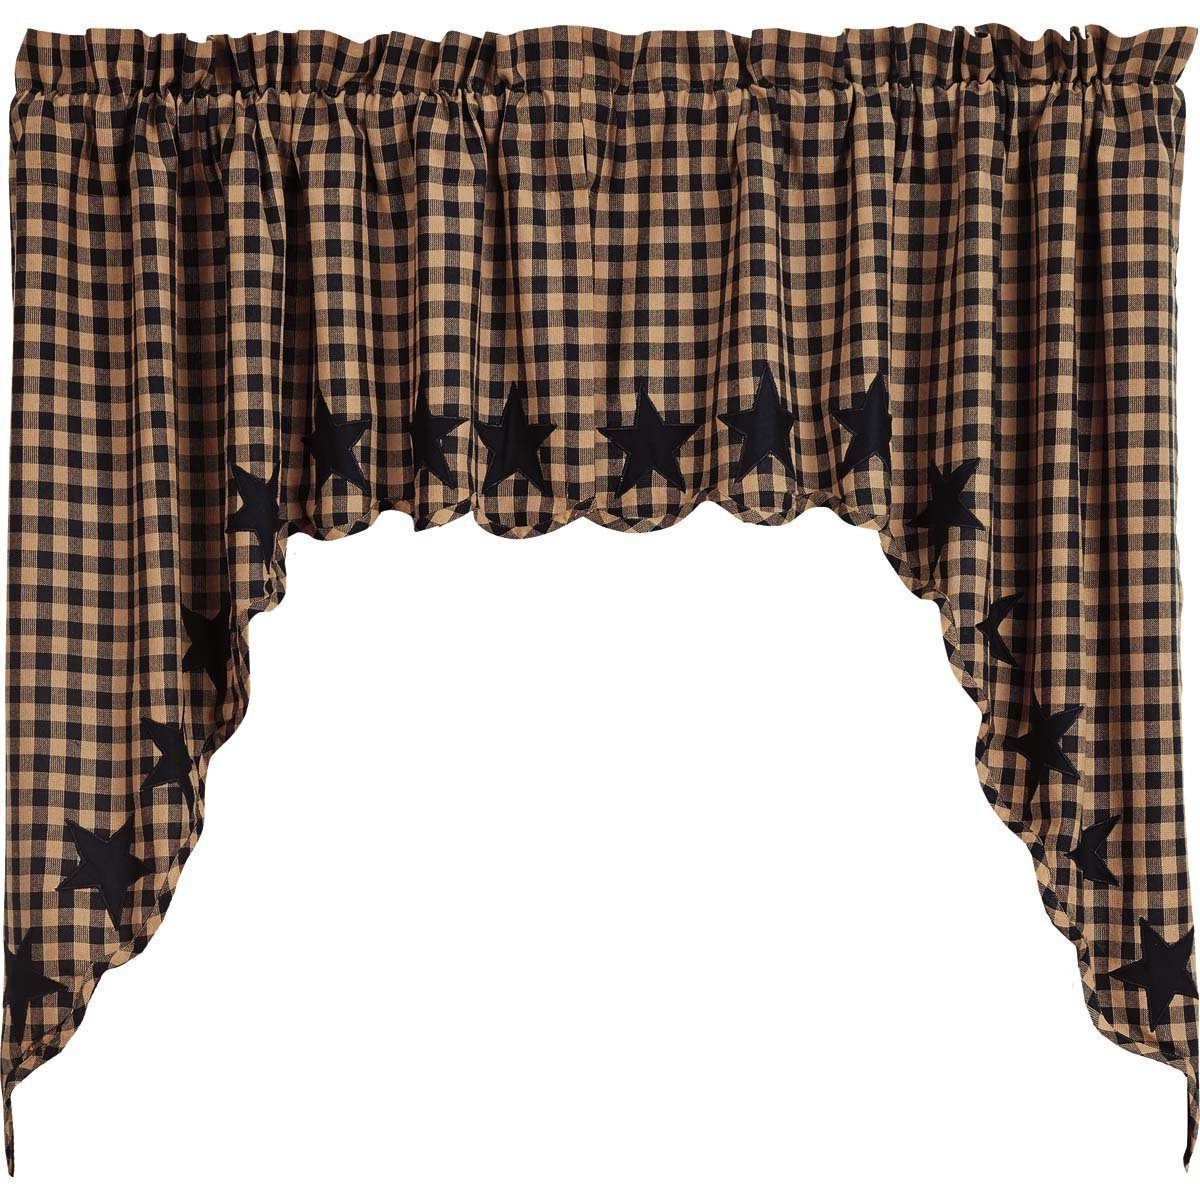 Swag Curtains Intended For Most Popular Check Scalloped Swag Sets (View 4 of 20)